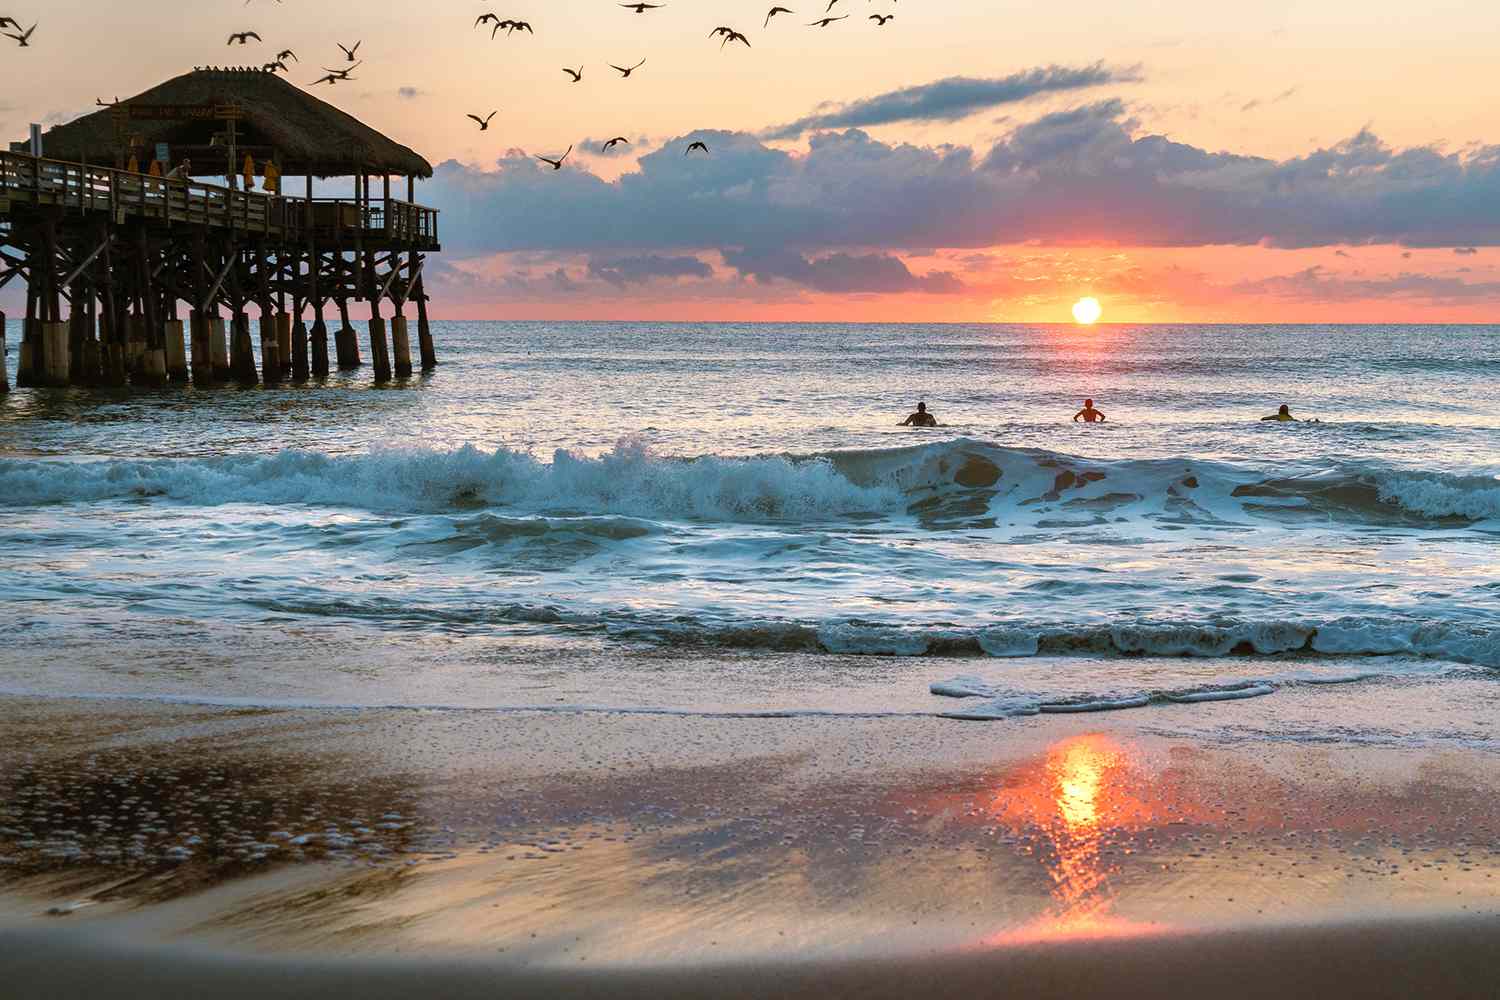 A group of surfers and a pier in the ocean at sunset.